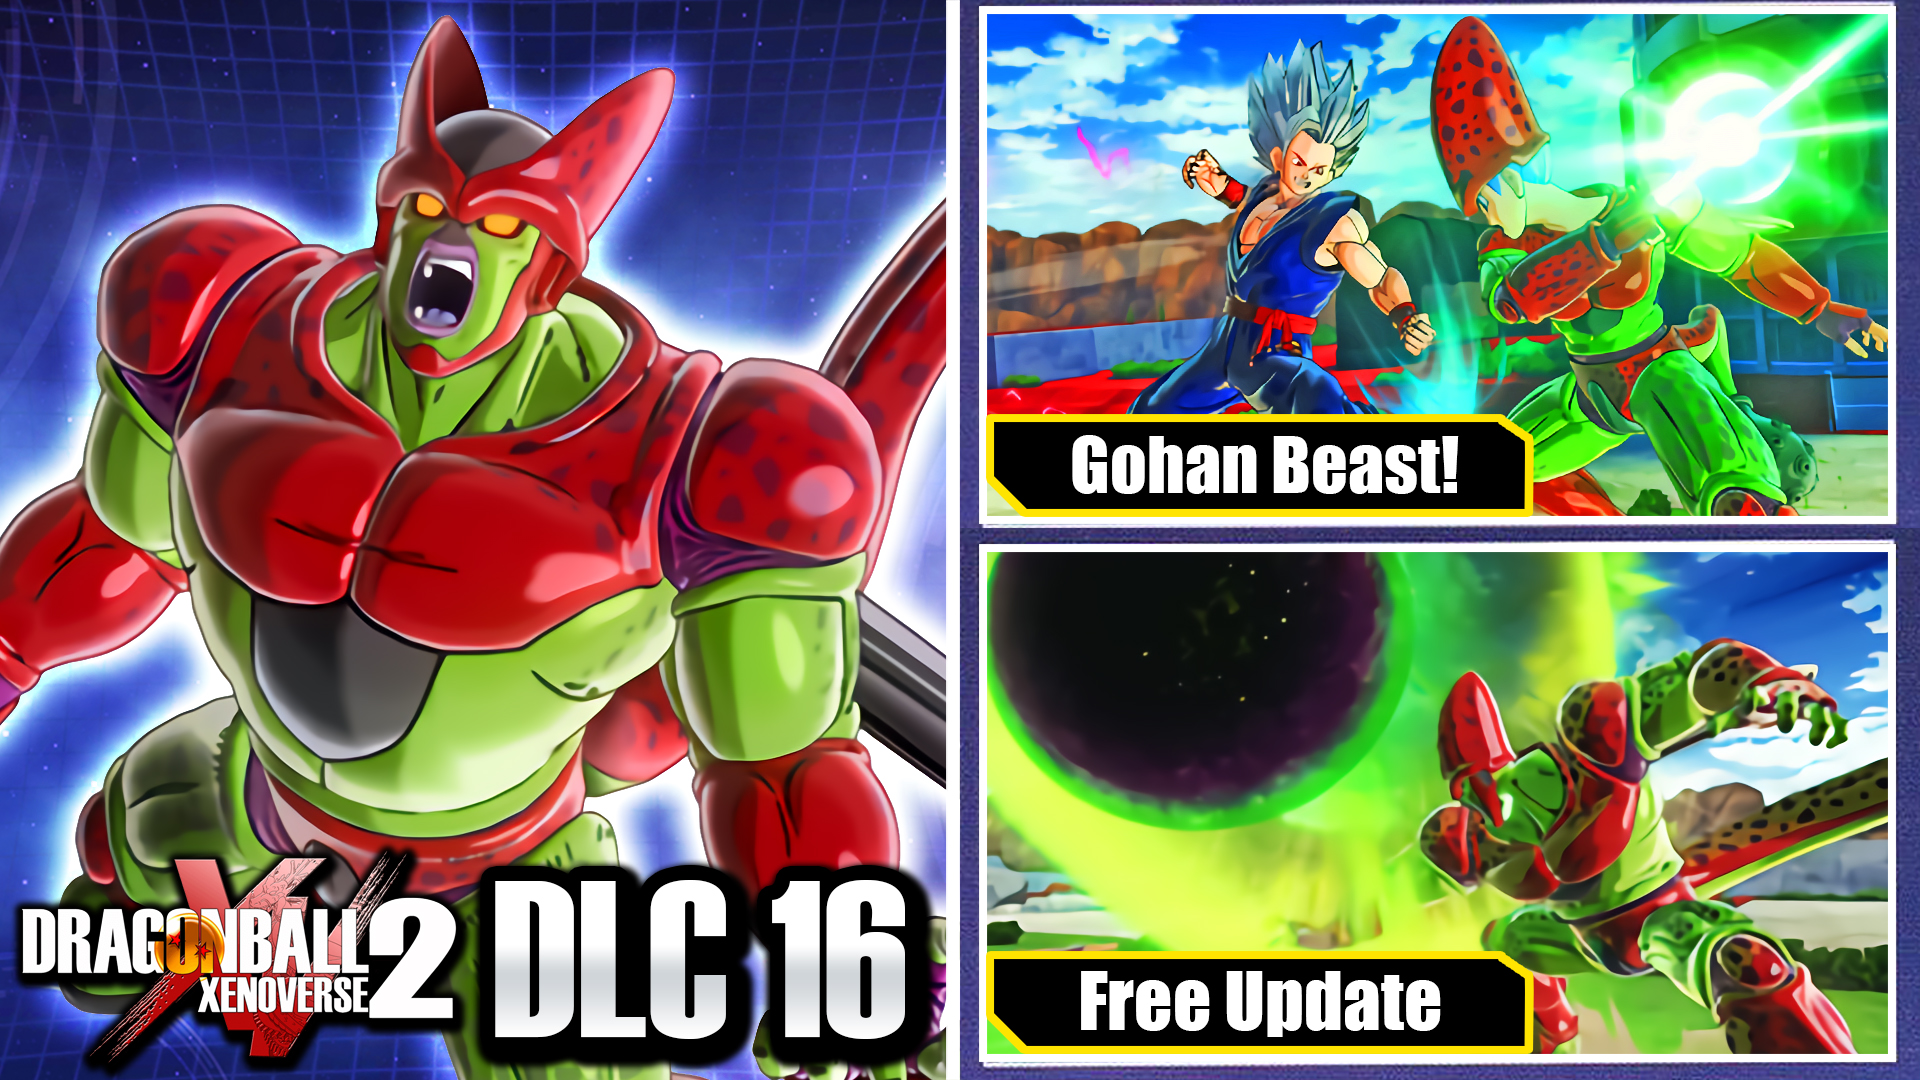 Dragon Ball Xenoverse 2 DLC 16 Trailer Confirms Gohan Beast Release Date -  PlayStation LifeStyle